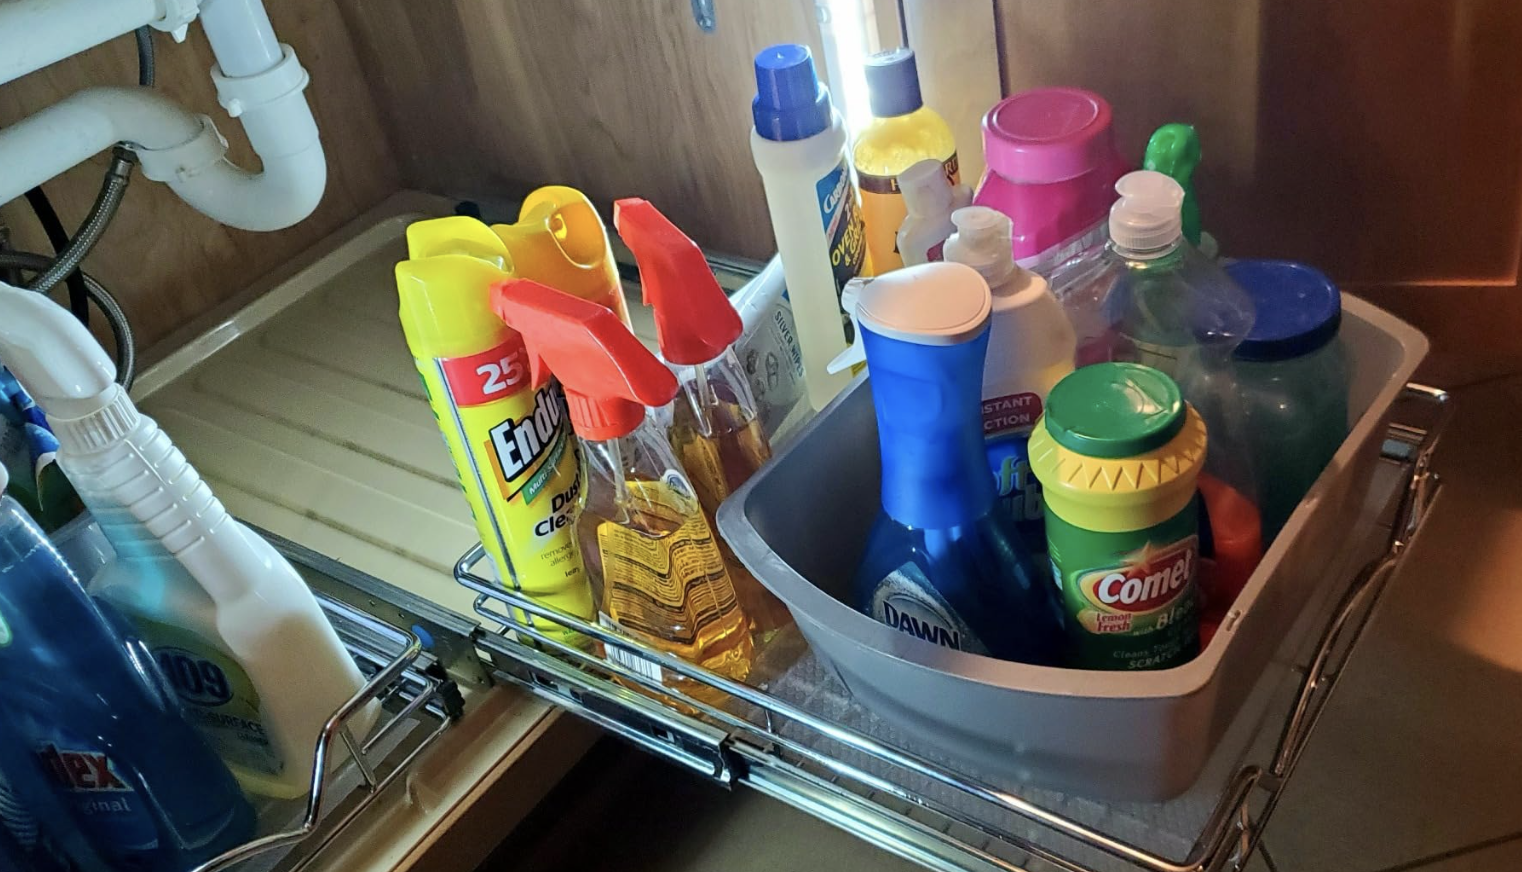 reviewer photo of various cleaning products on the pull out cabinet organizers